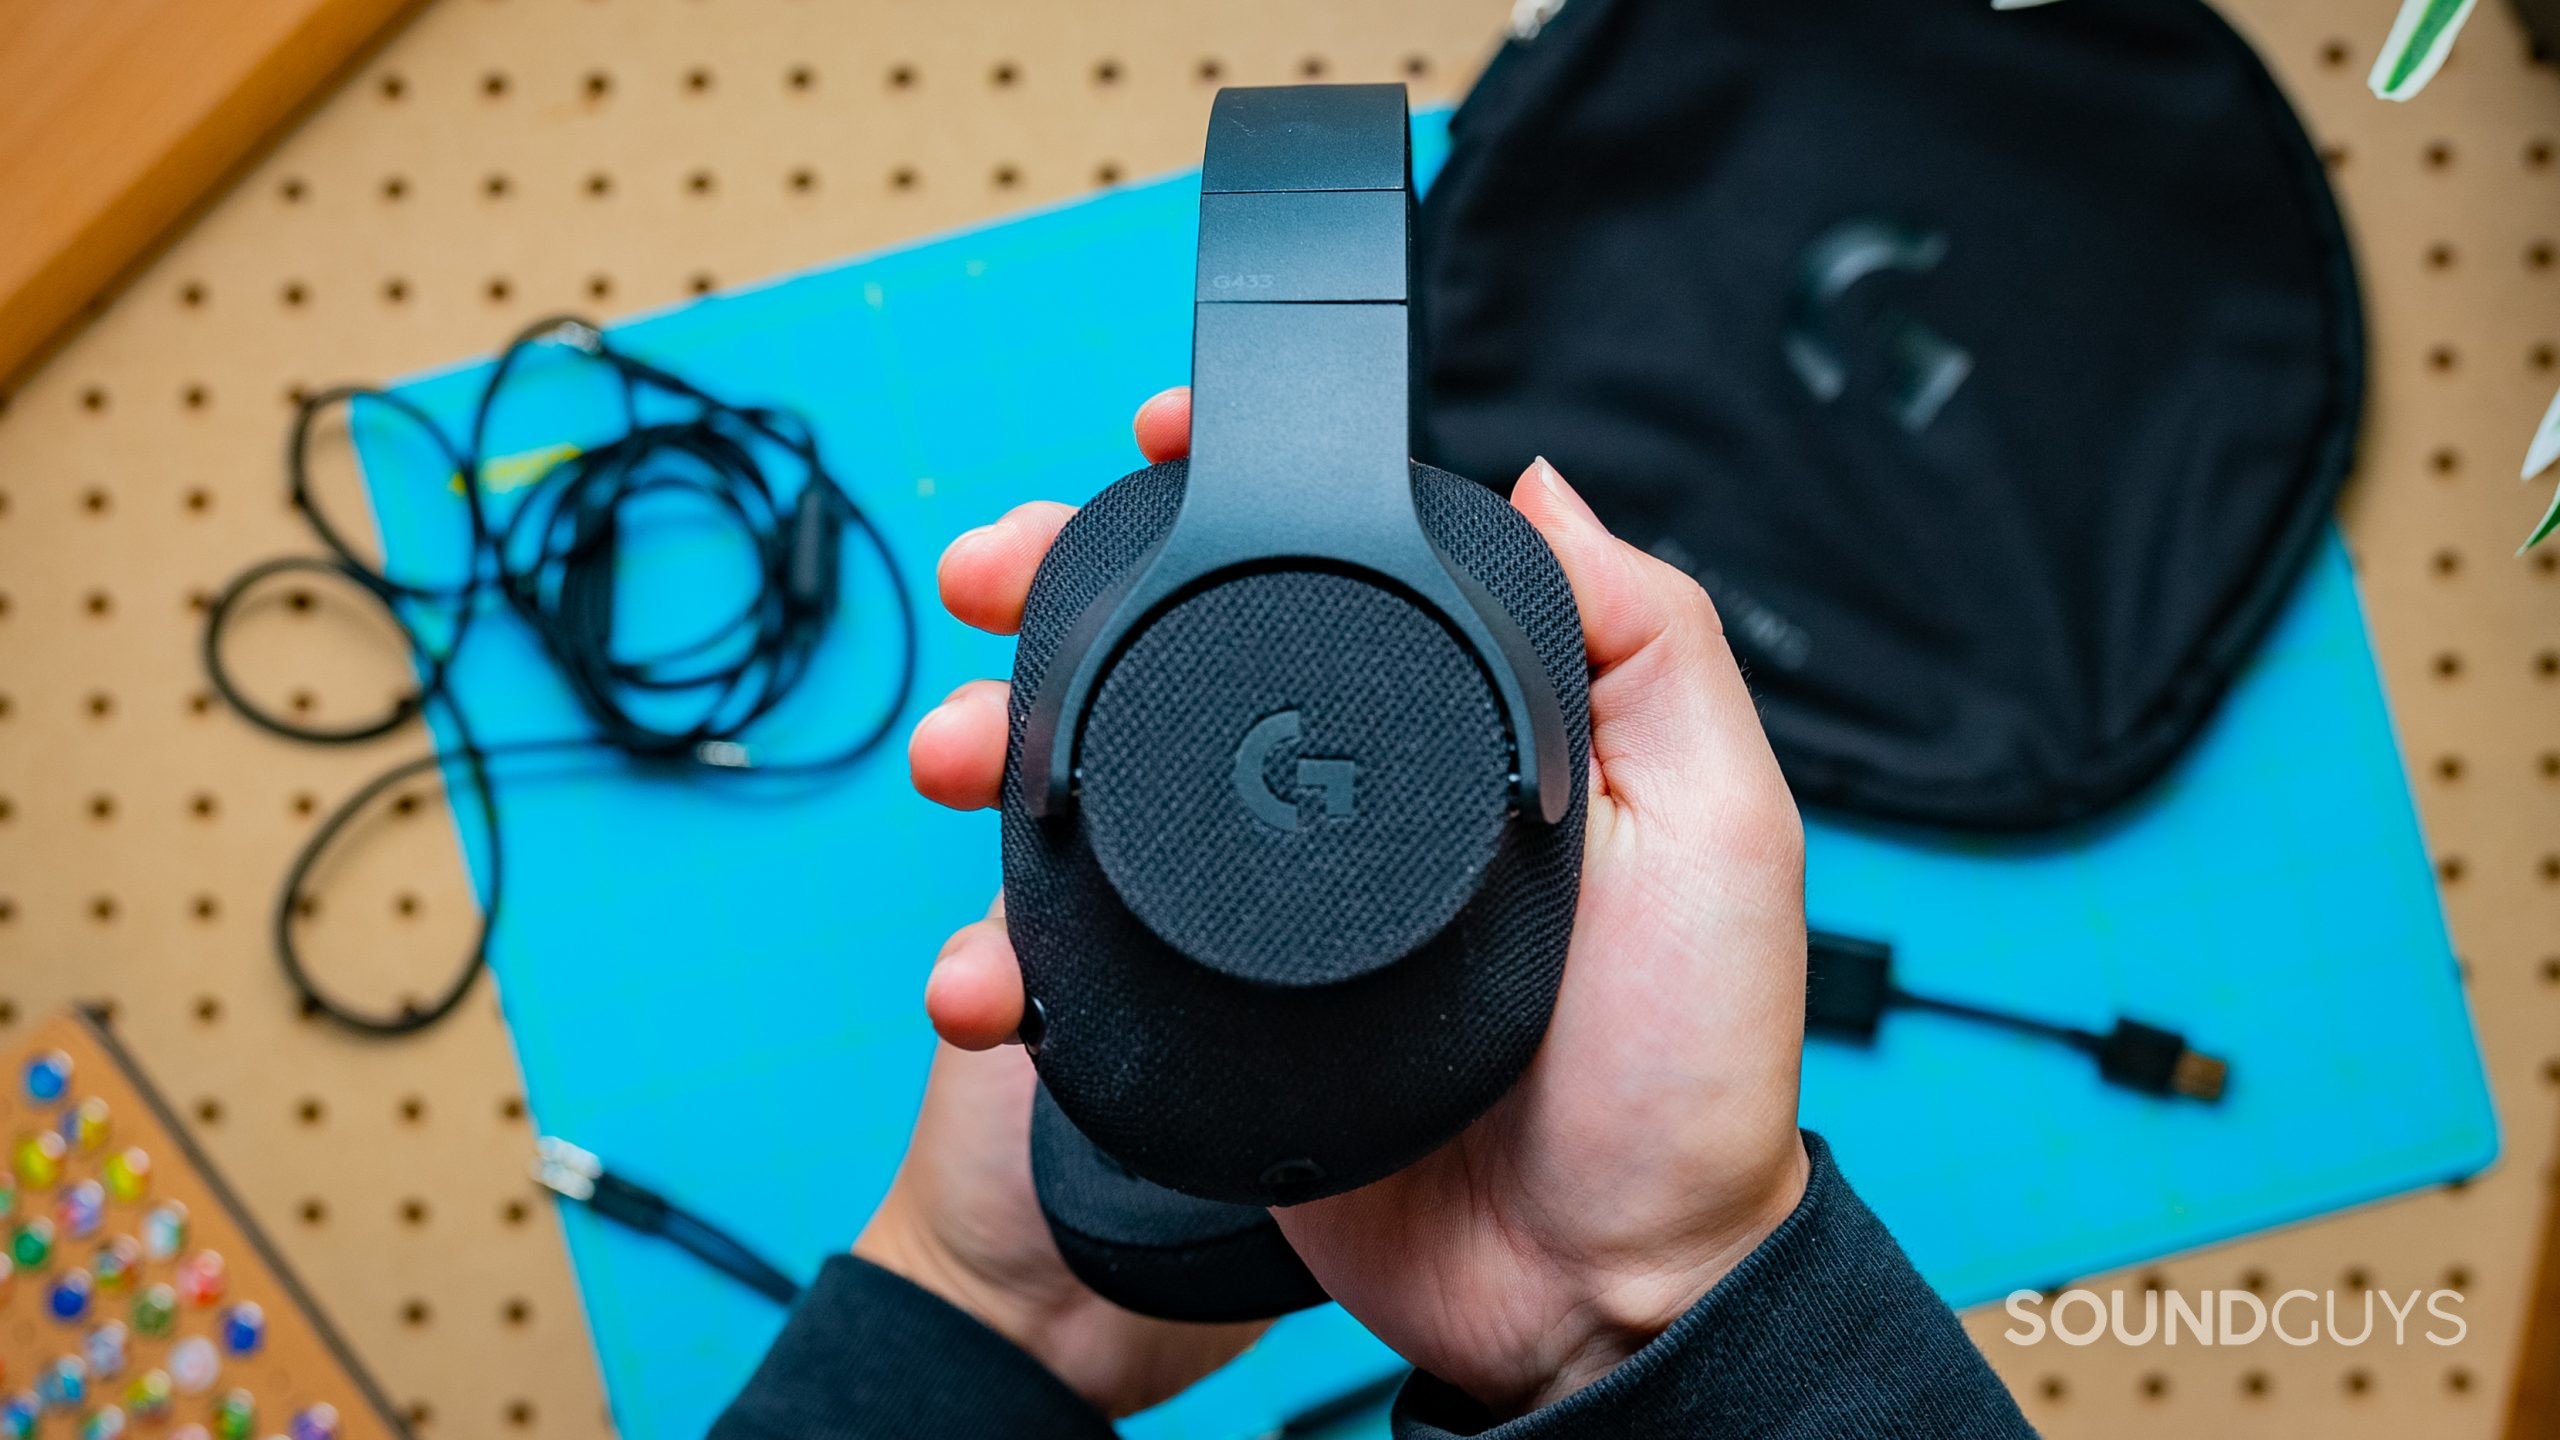 The Logitech G433 being held in someone's hands with its accessories on the table behind it.